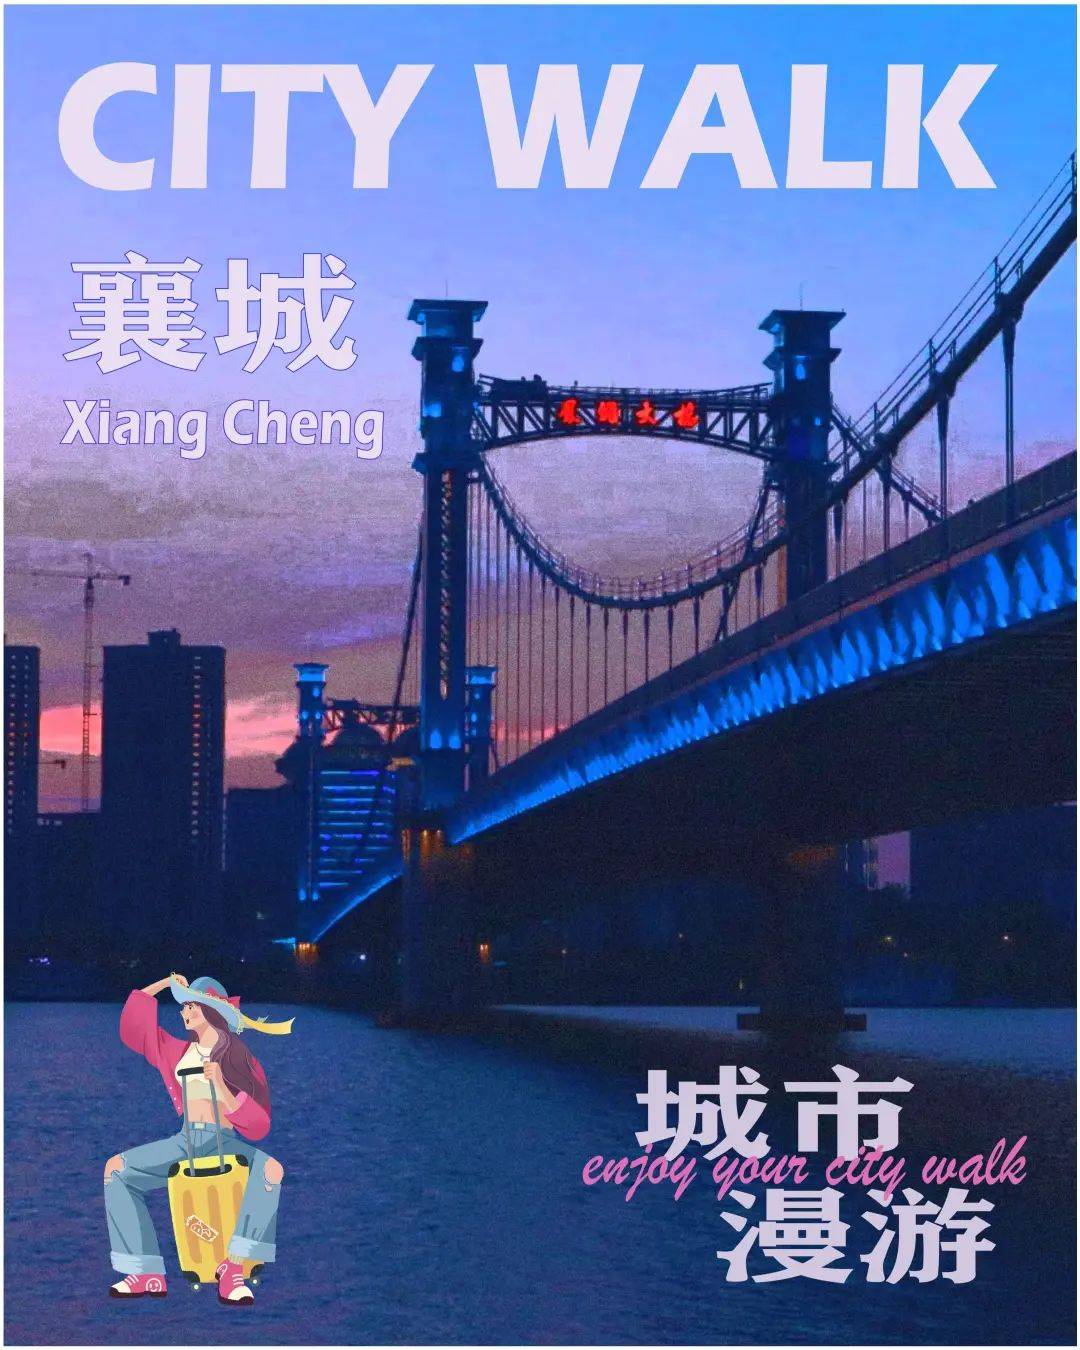 city ​​walk combines VR panorama to create a smart city in the new era.